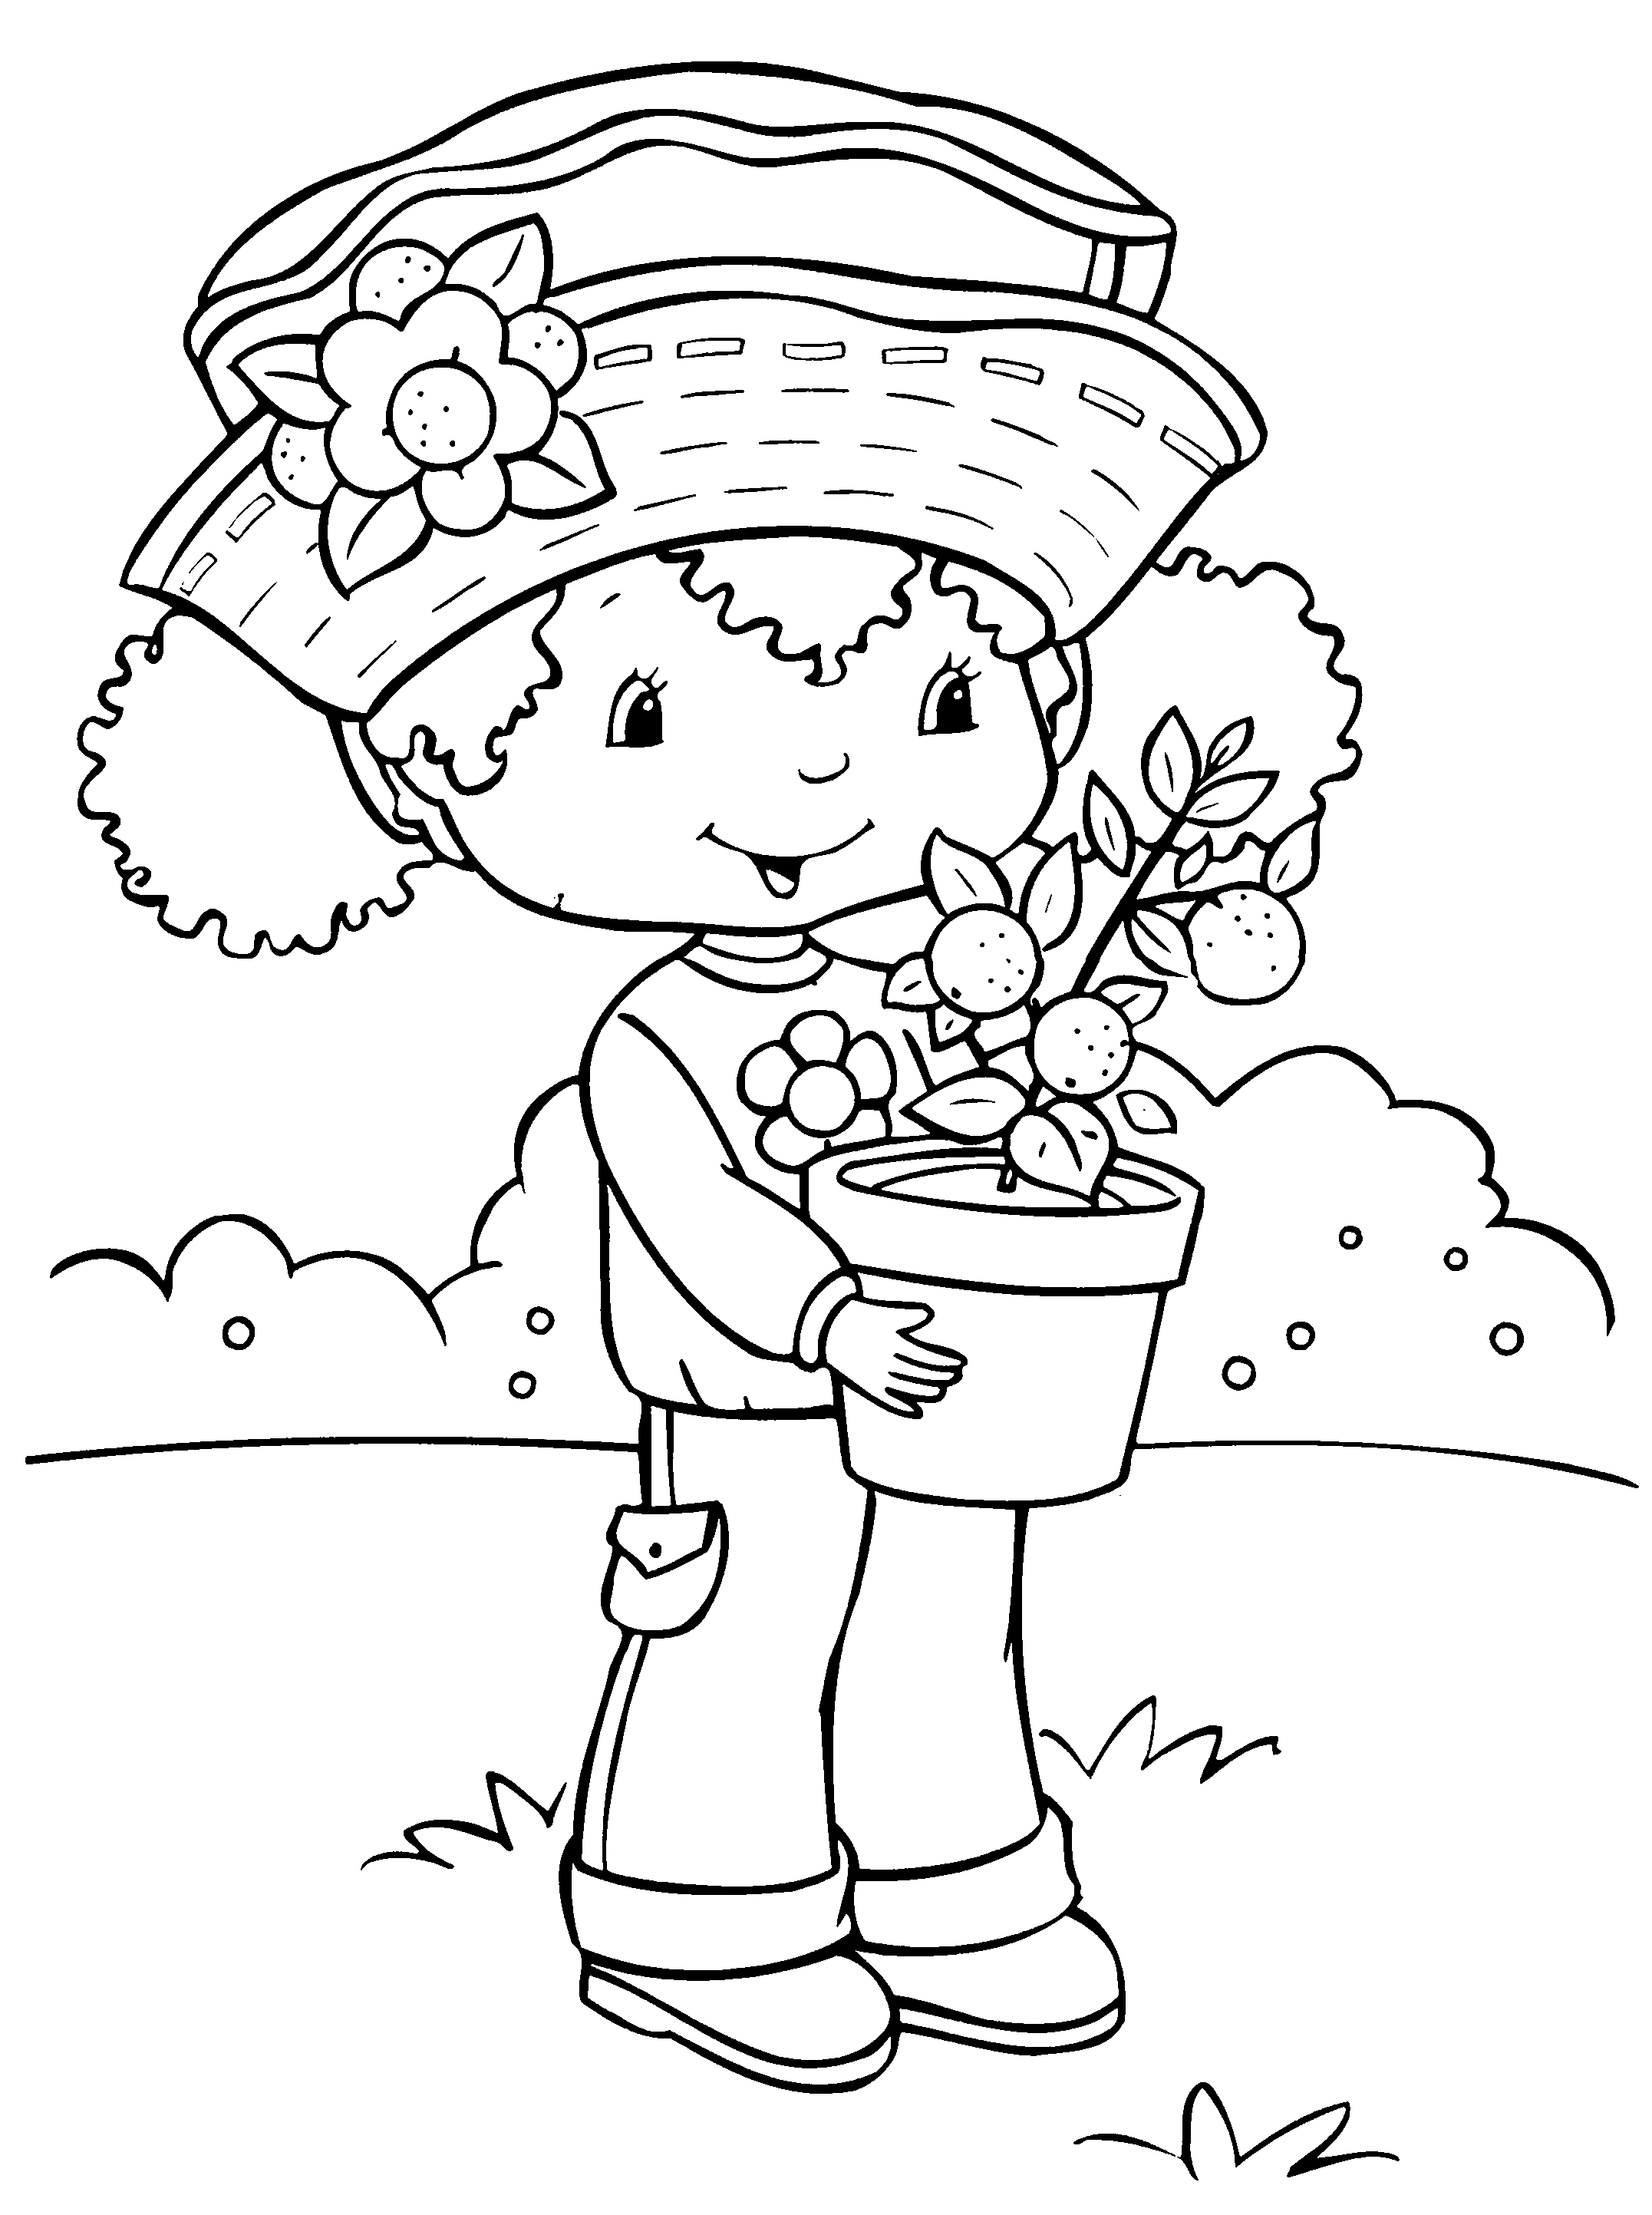 Strawberry Shortcake coloring pages to print for free - Strawberry